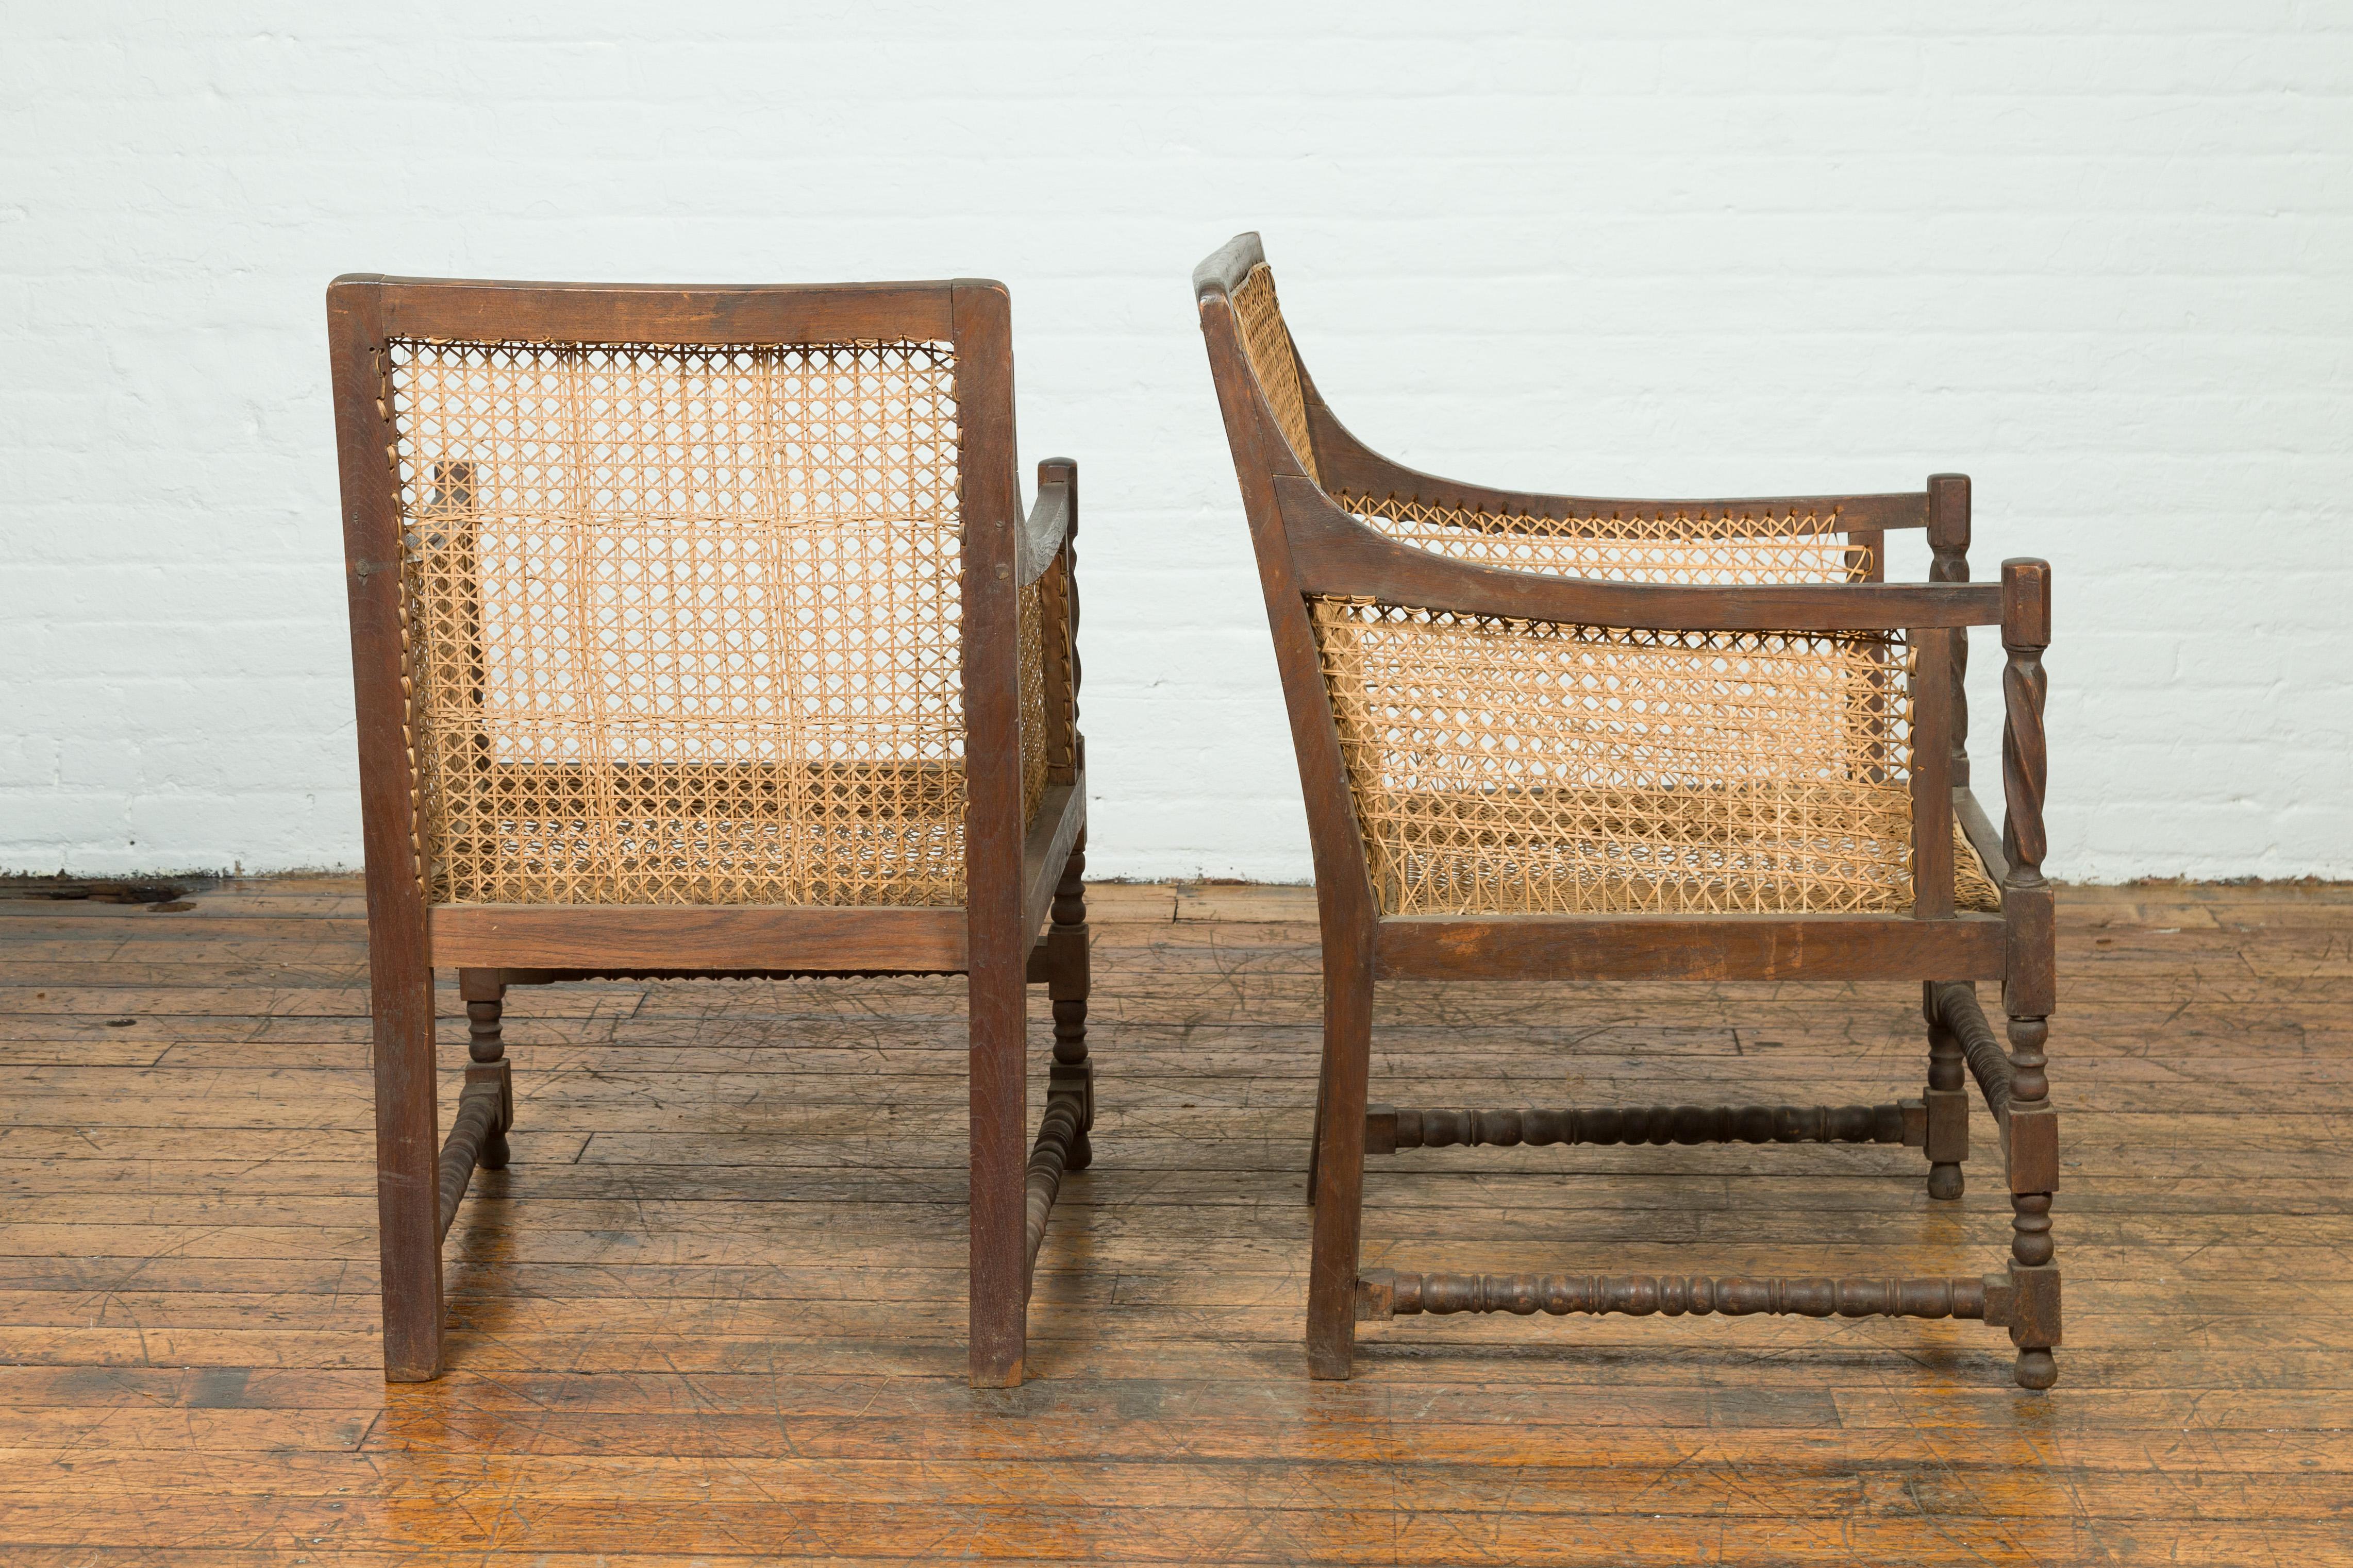 Pair of Antique Rustic Thai Turned Wood Armchairs with Rattan Backs and Seats 8